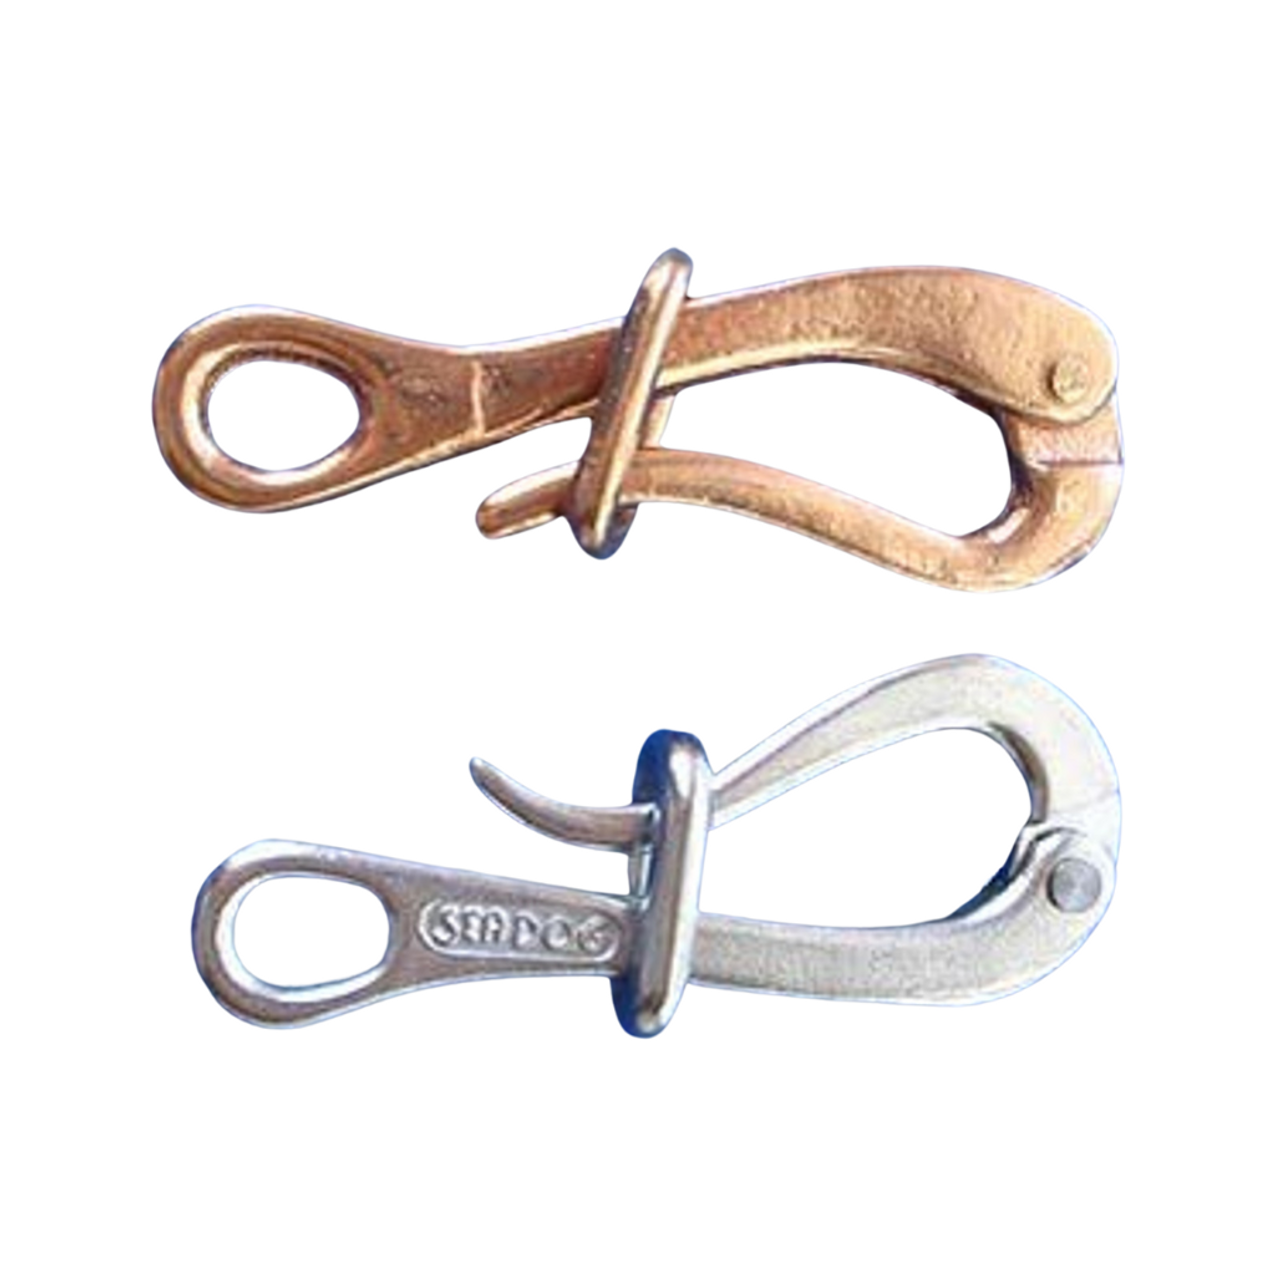 https://cdn11.bigcommerce.com/s-8trdi5a57j/images/stencil/1280x1280/products/5343/7342/Stainless_Bronze_and_Stainless_Pelican_Hooks__62586.1683239044.png?c=1